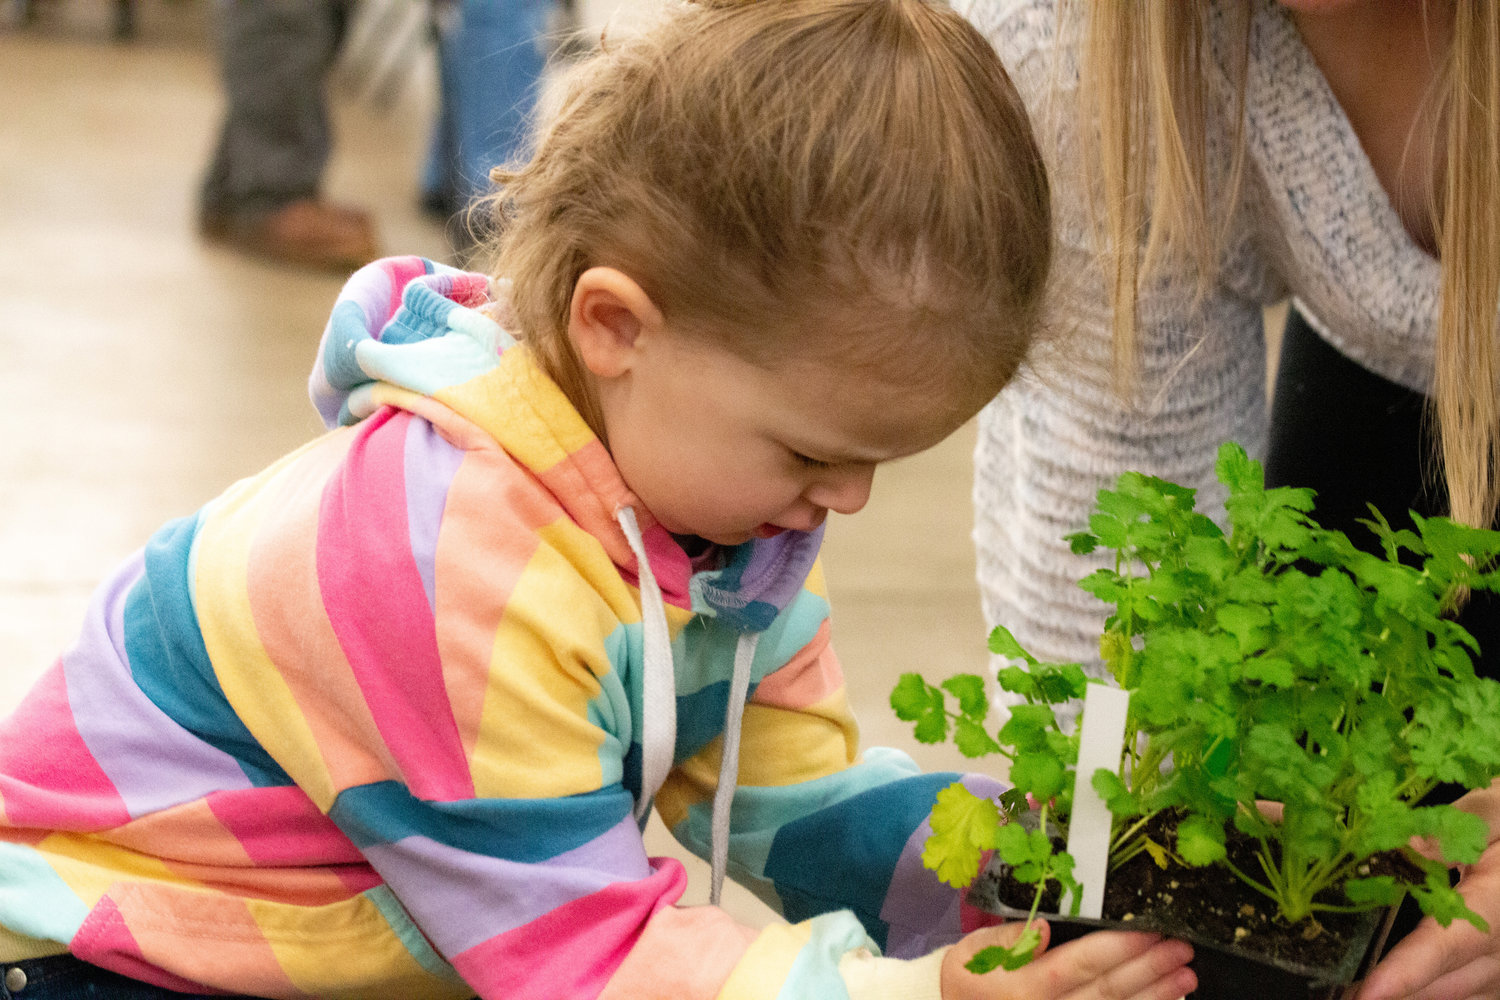 Renee Gustafson, daughter of Jeremy and Brooke, helps place a new plant in their cart at the Master Gardener Plant Sale at the Southwest Washington Fairgrounds on Saturday.